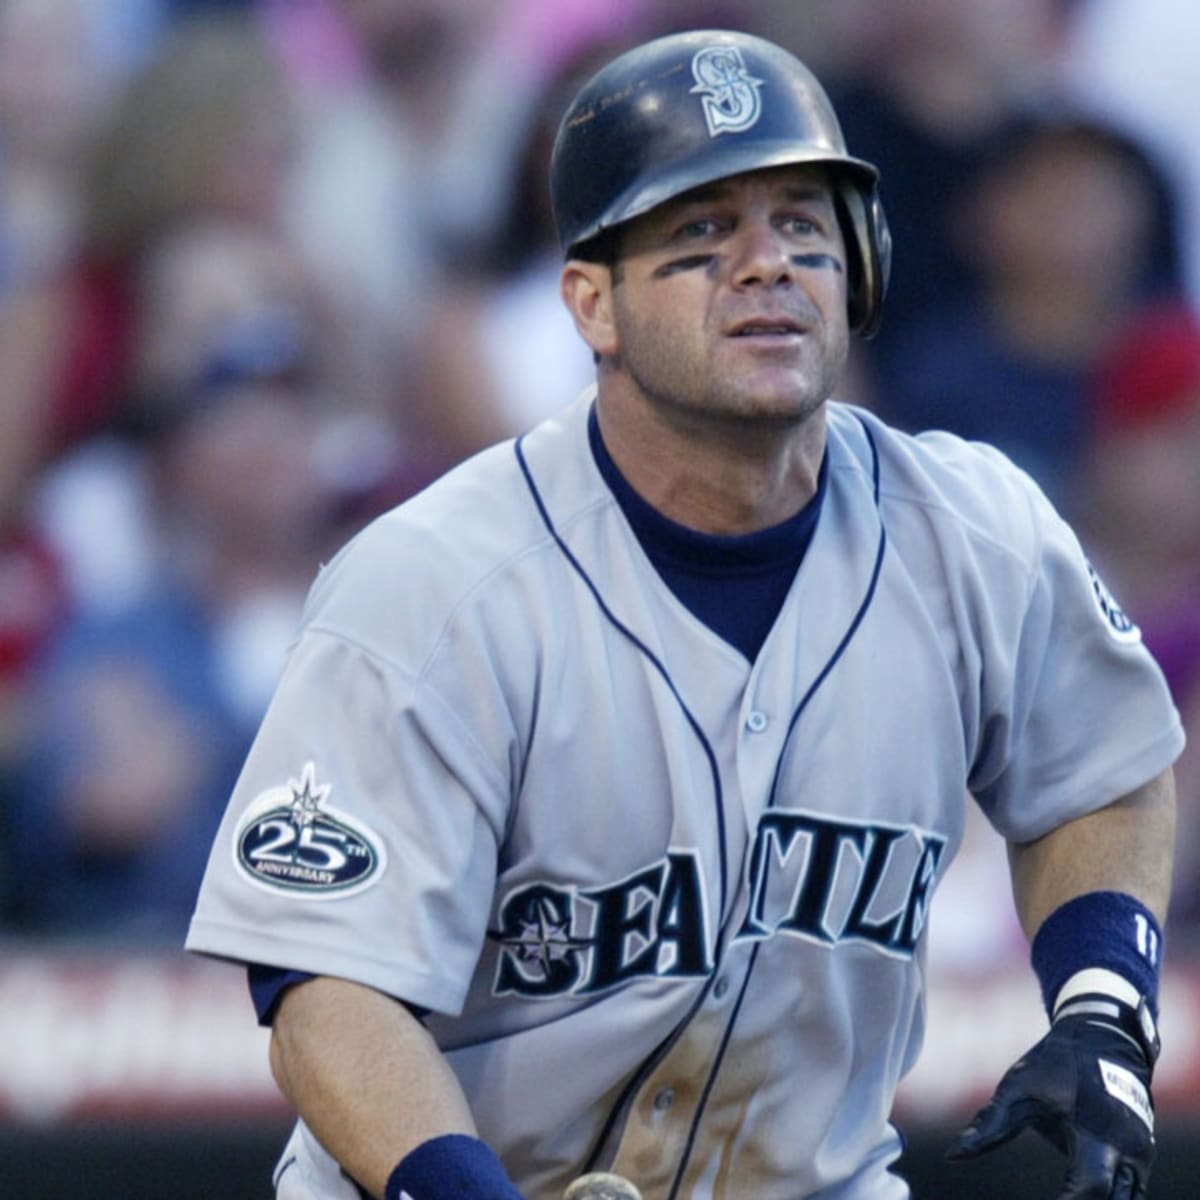 Edgar Martinez is a deserving player to get into the Hall of Fame